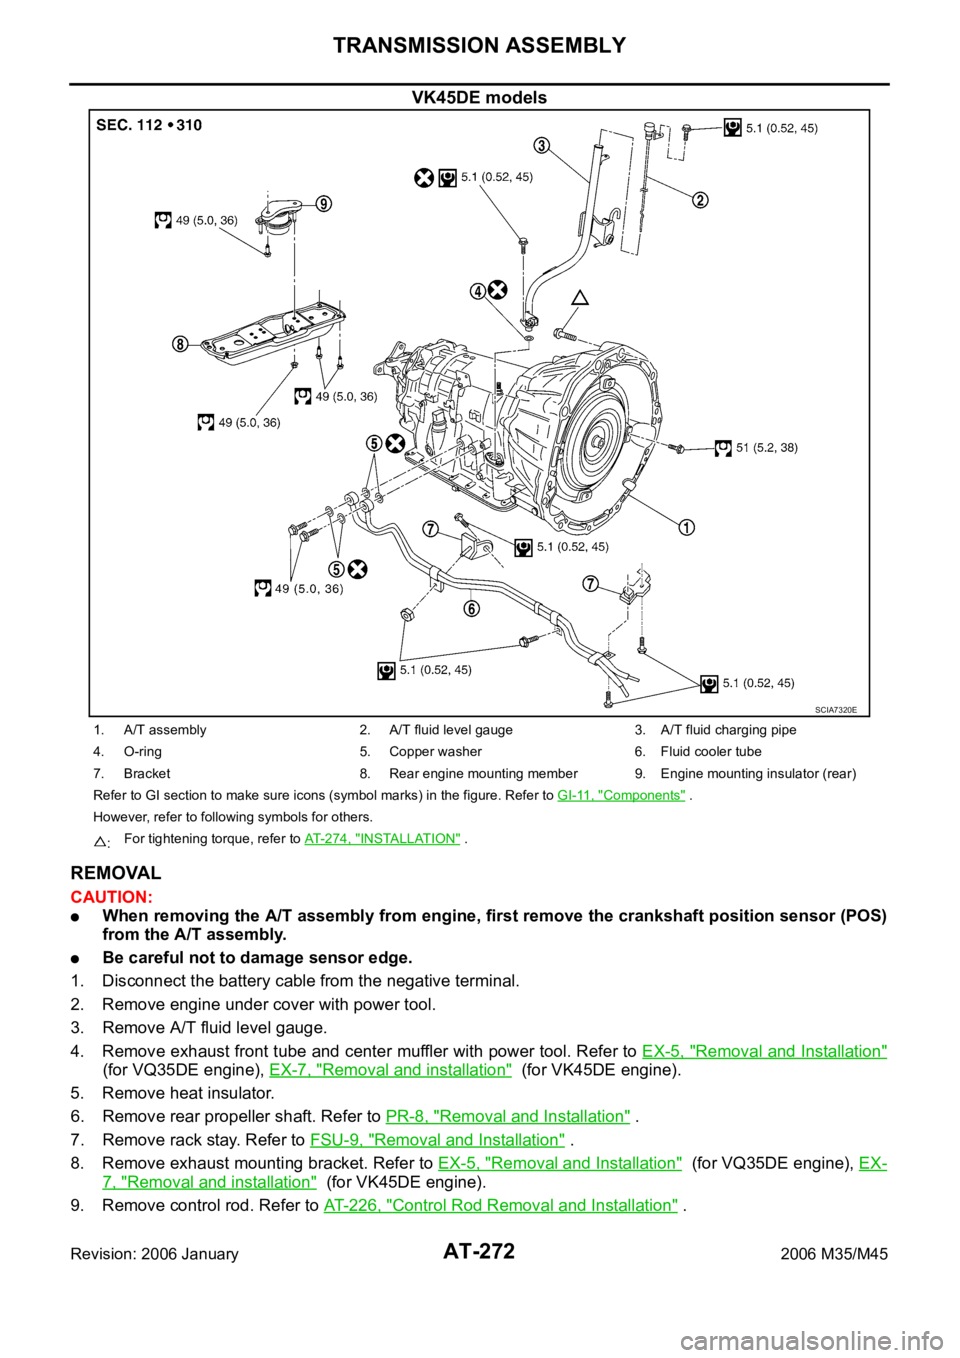 INFINITI M35 2006  Factory Service Manual AT-272
TRANSMISSION ASSEMBLY
Revision: 2006 January2006 M35/M45
VK45DE models
REMOVAL
CAUTION:
When removing the A/T assembly from engine, first remove the crankshaft position sensor (POS)
from the A/